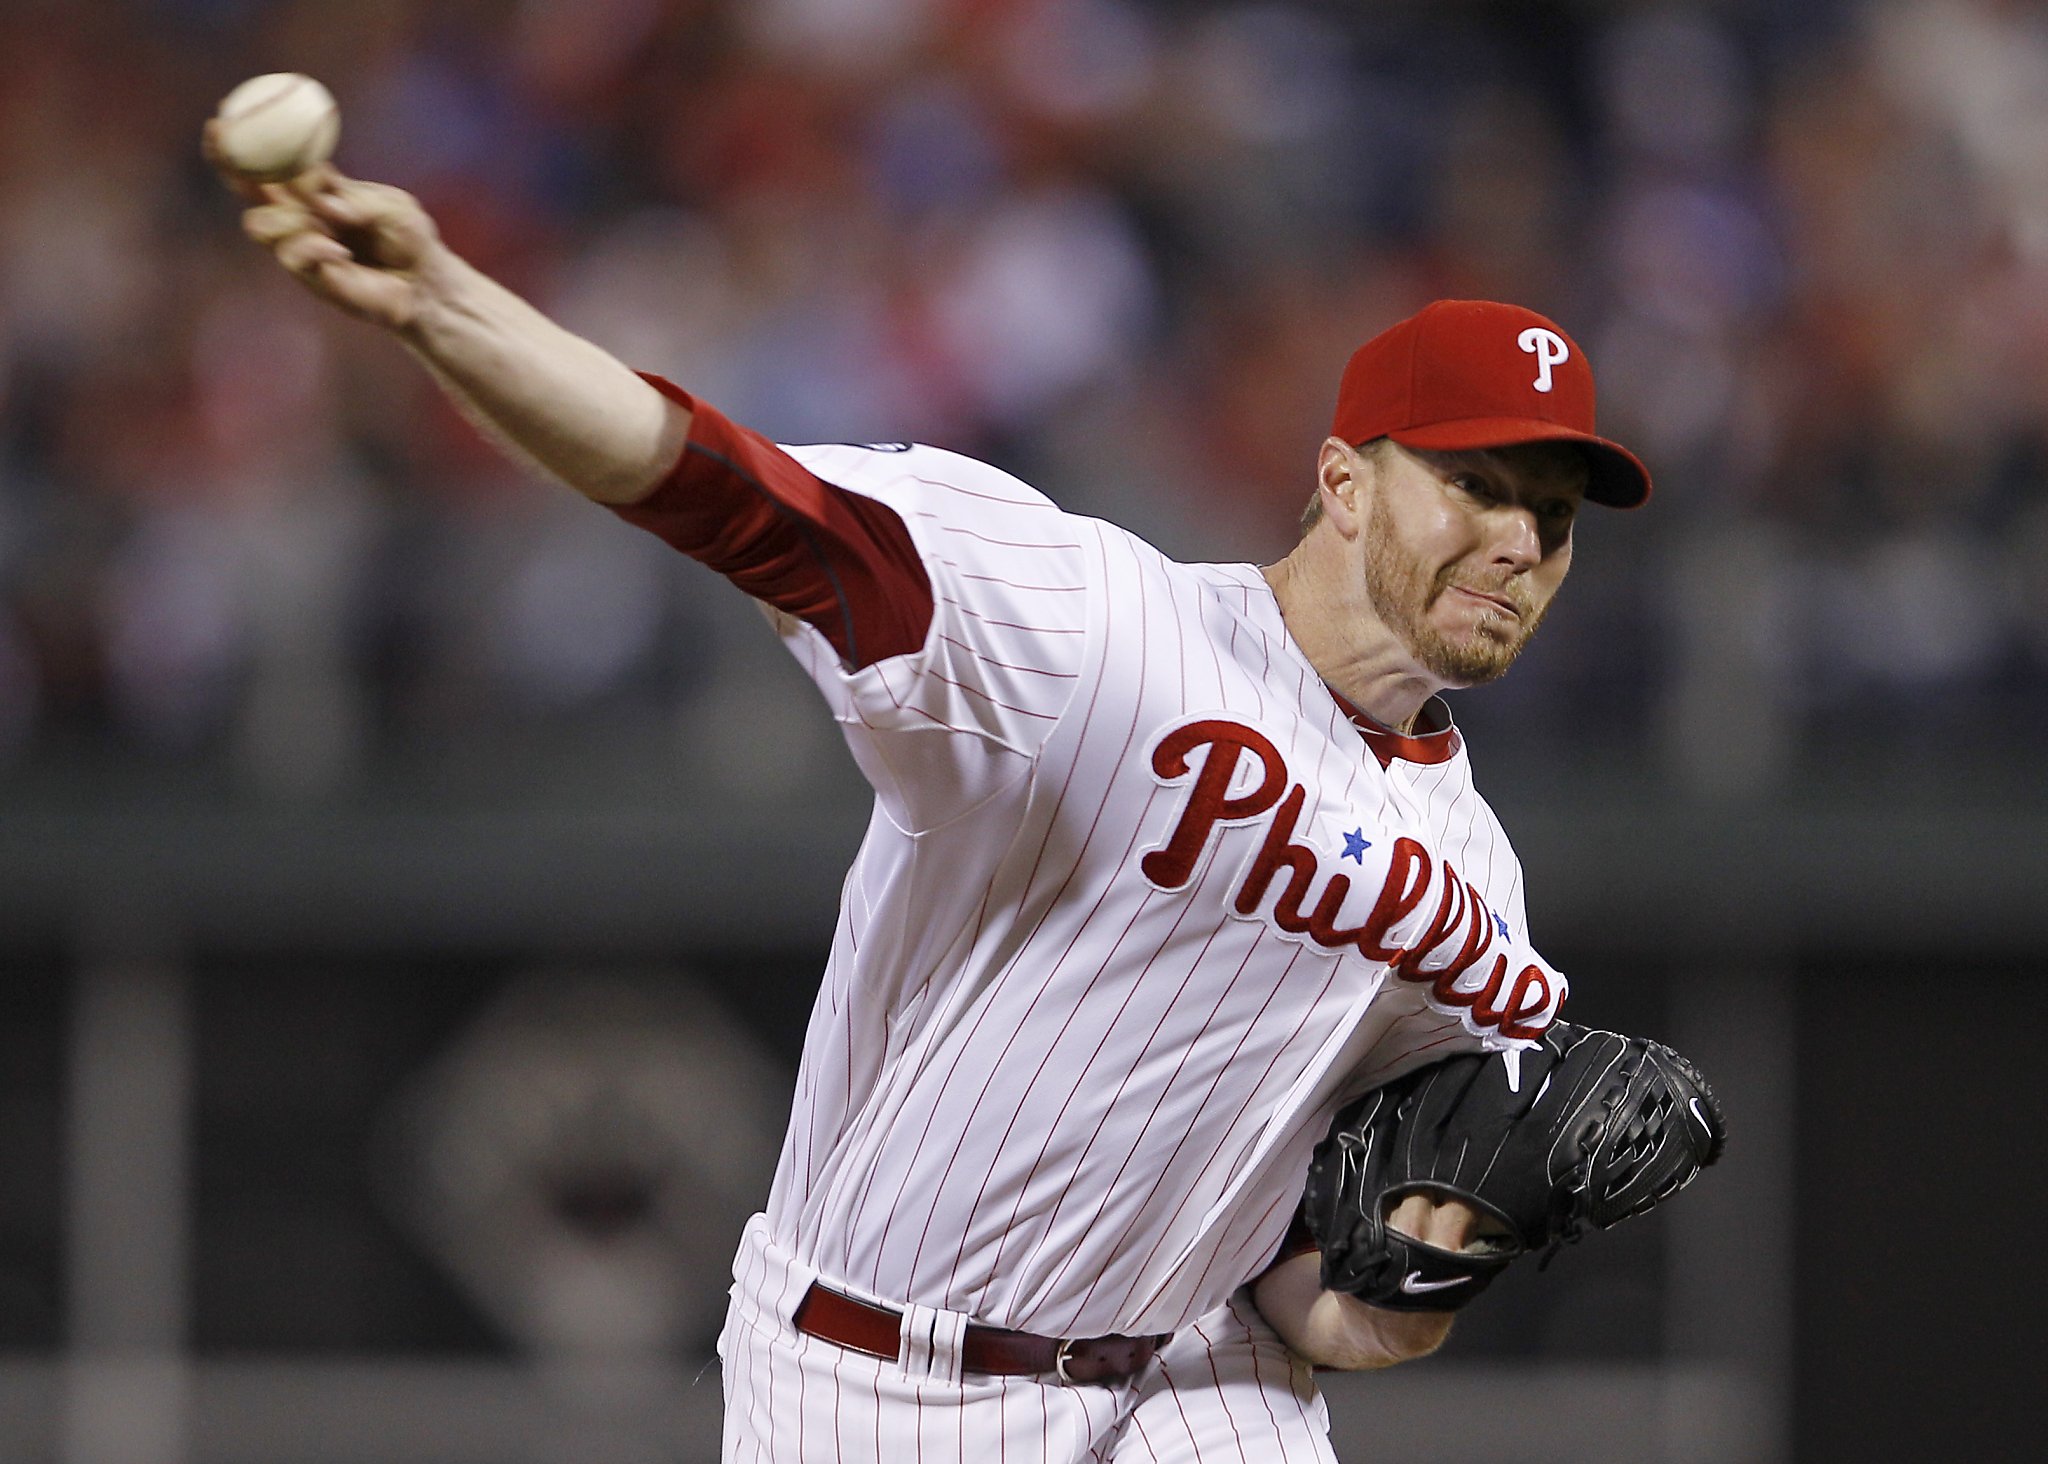 Roy Halladay on drugs, doing stunts when plane crashed, NTSB report says